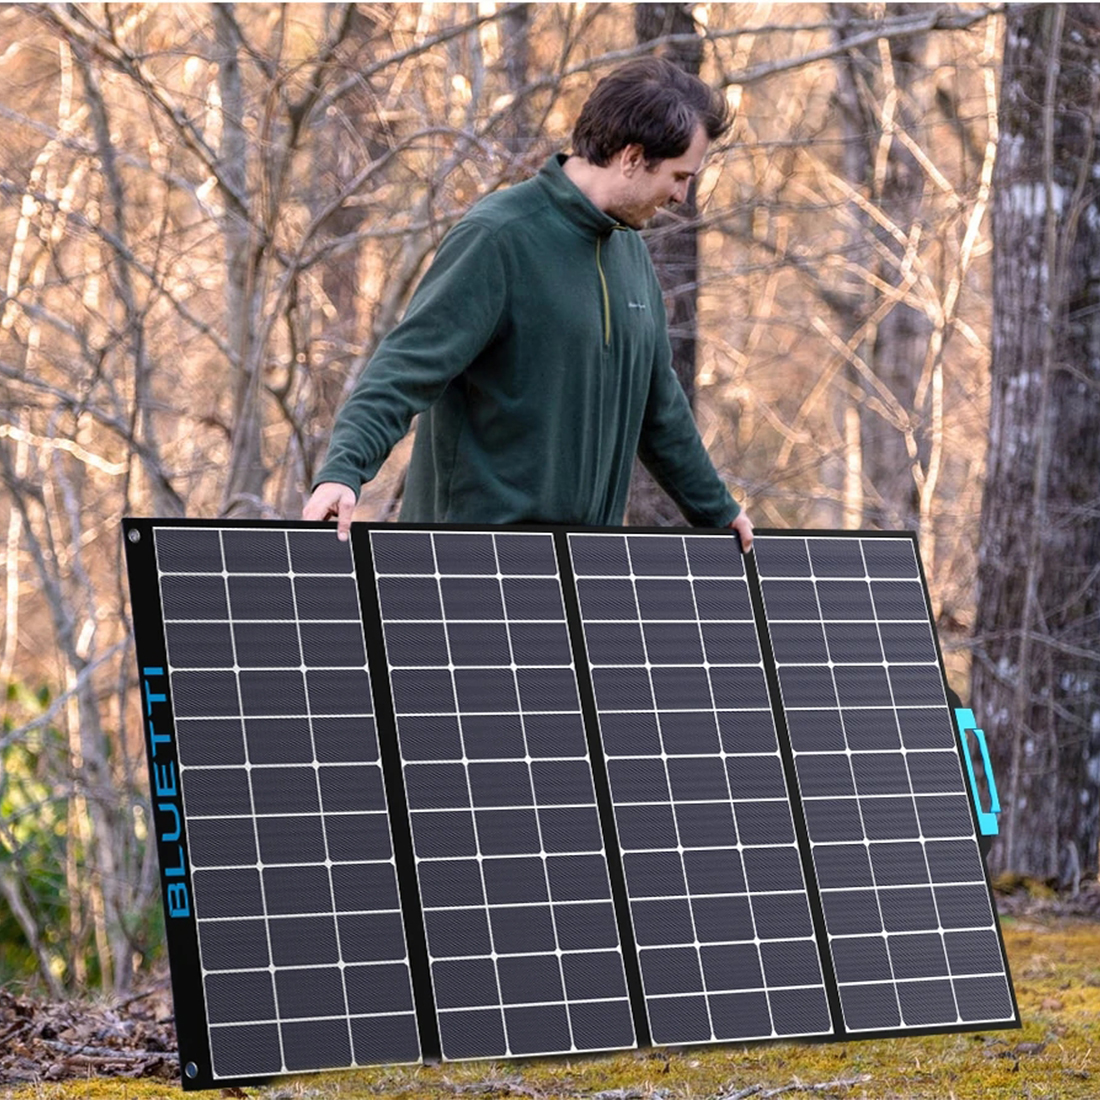 Find EU Direct BLUETTI SP350 350W Solar Panel 36V 9 7A Portable Solar Charger Conversion Rate Up To 24 86 5 37 0 9inch for Sale on Gipsybee.com with cryptocurrencies